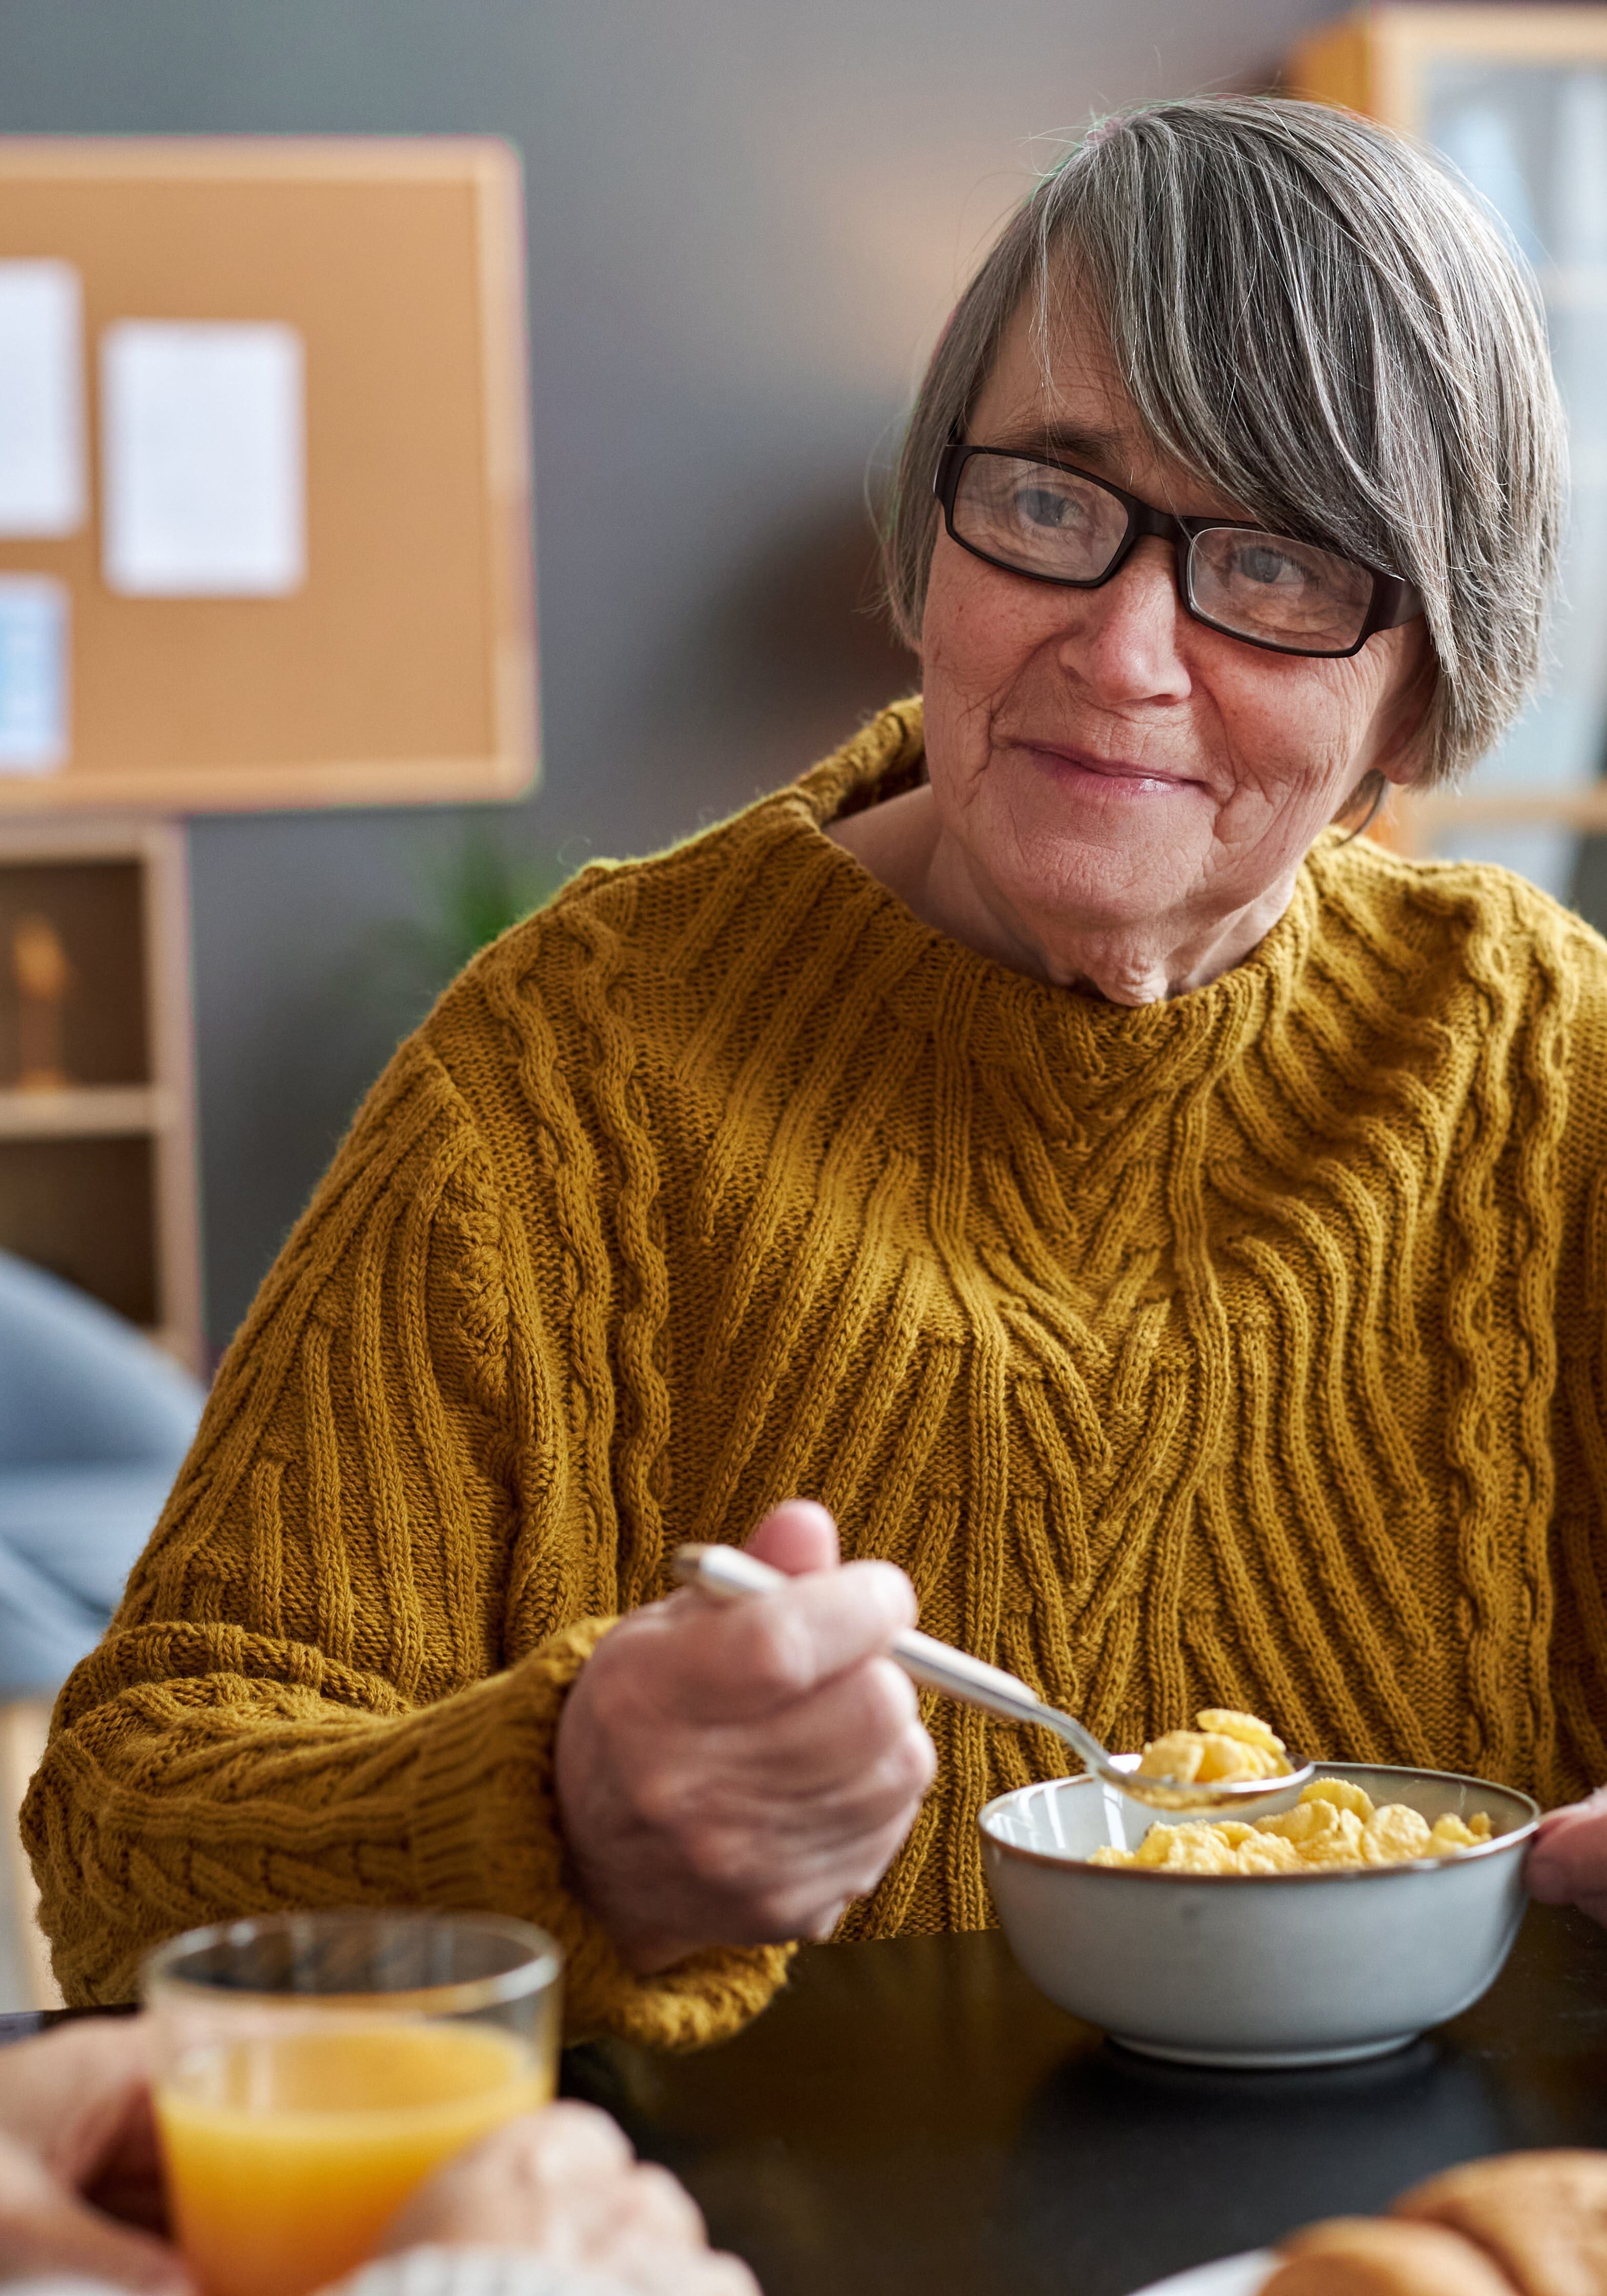 Smiling senior woman eating cereal